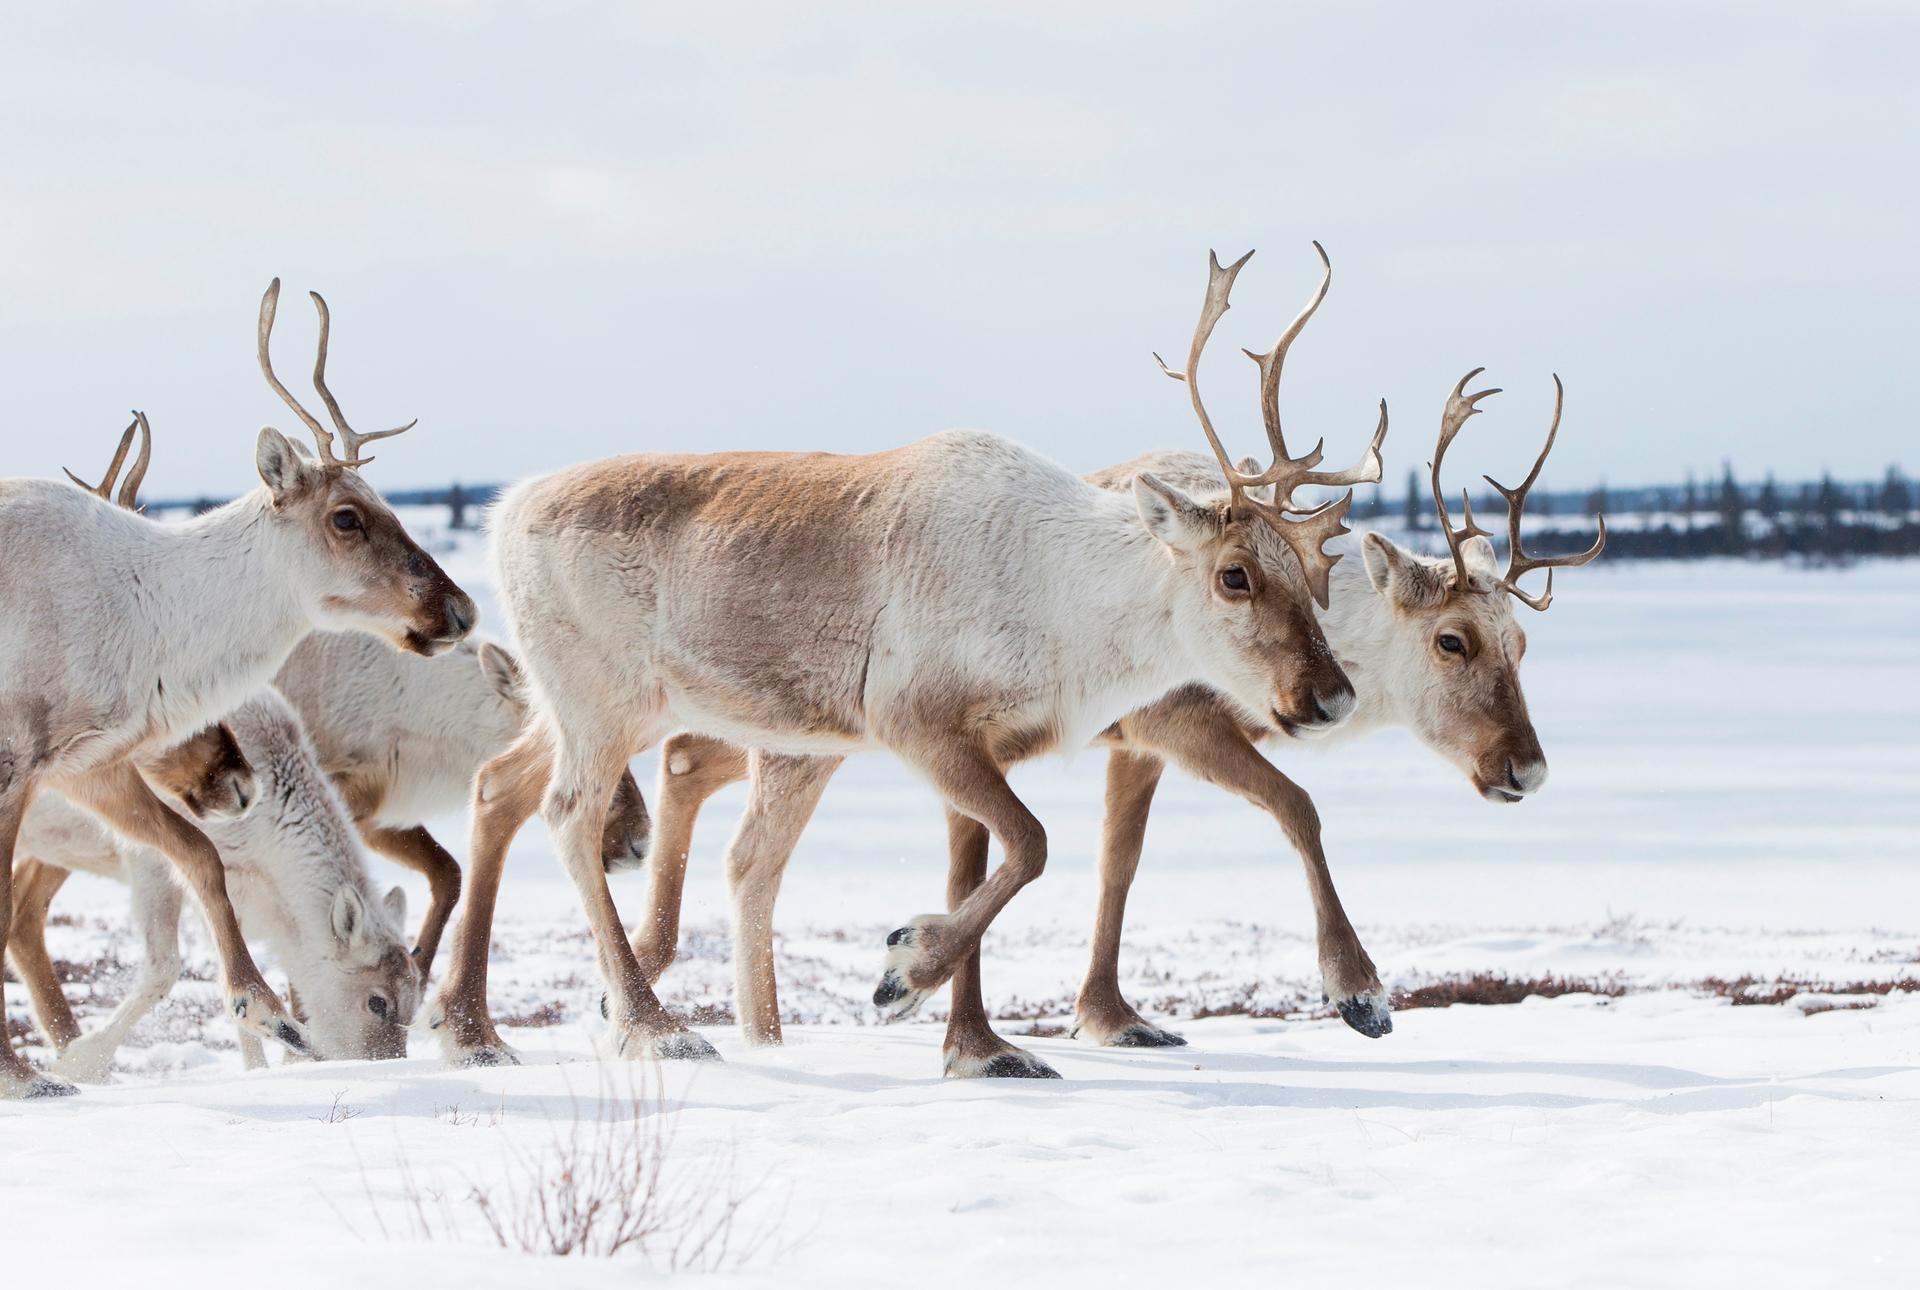 A group of caribou in the midst of migrating across a snowy plain